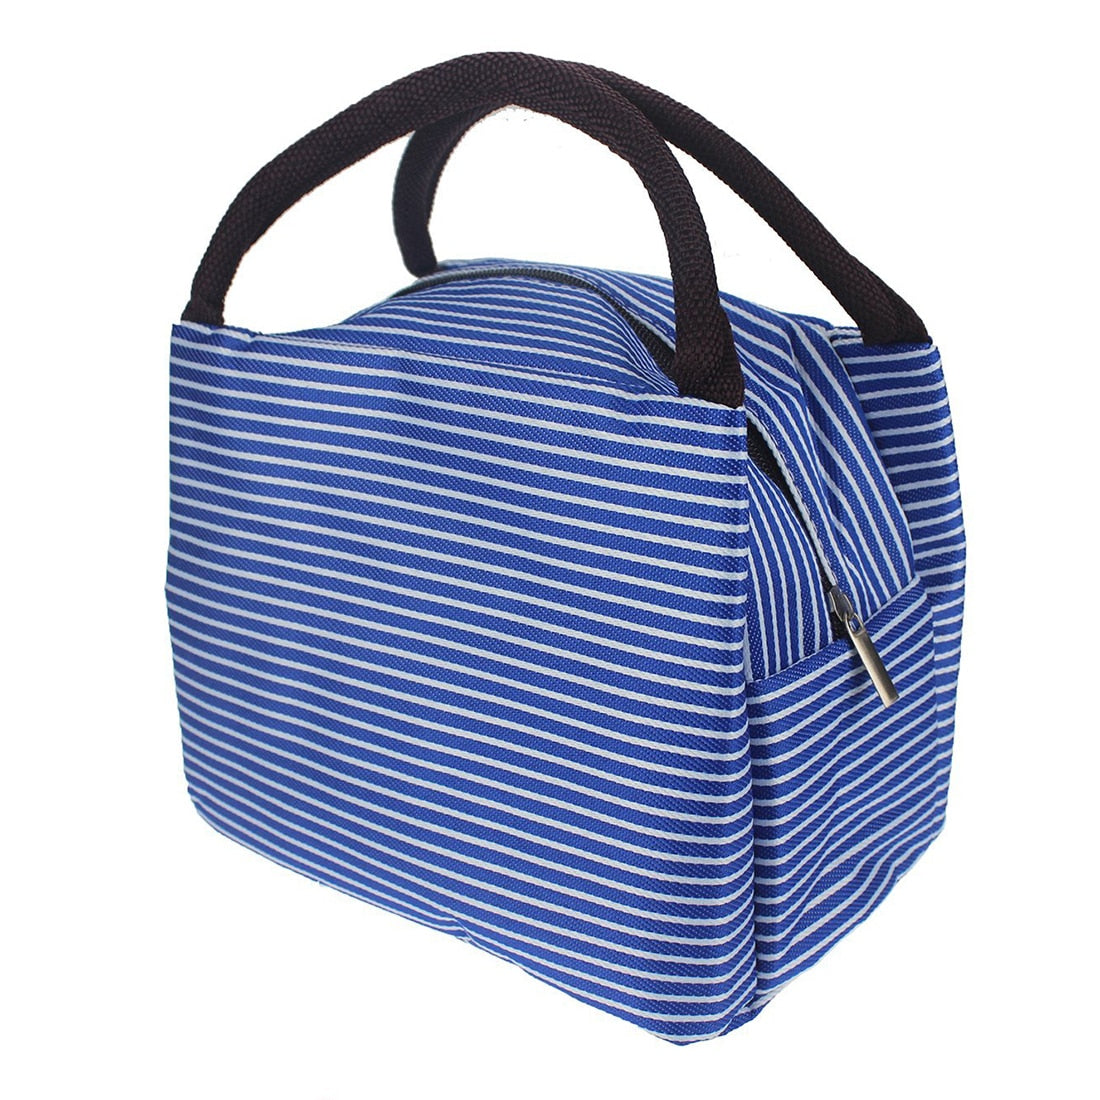 Portable Lunch Bag New Stripe Cooler Bag Thermal Insulation Bags Travel Picnic Food Lunch box bag for Women Girls Kids - ebowsos